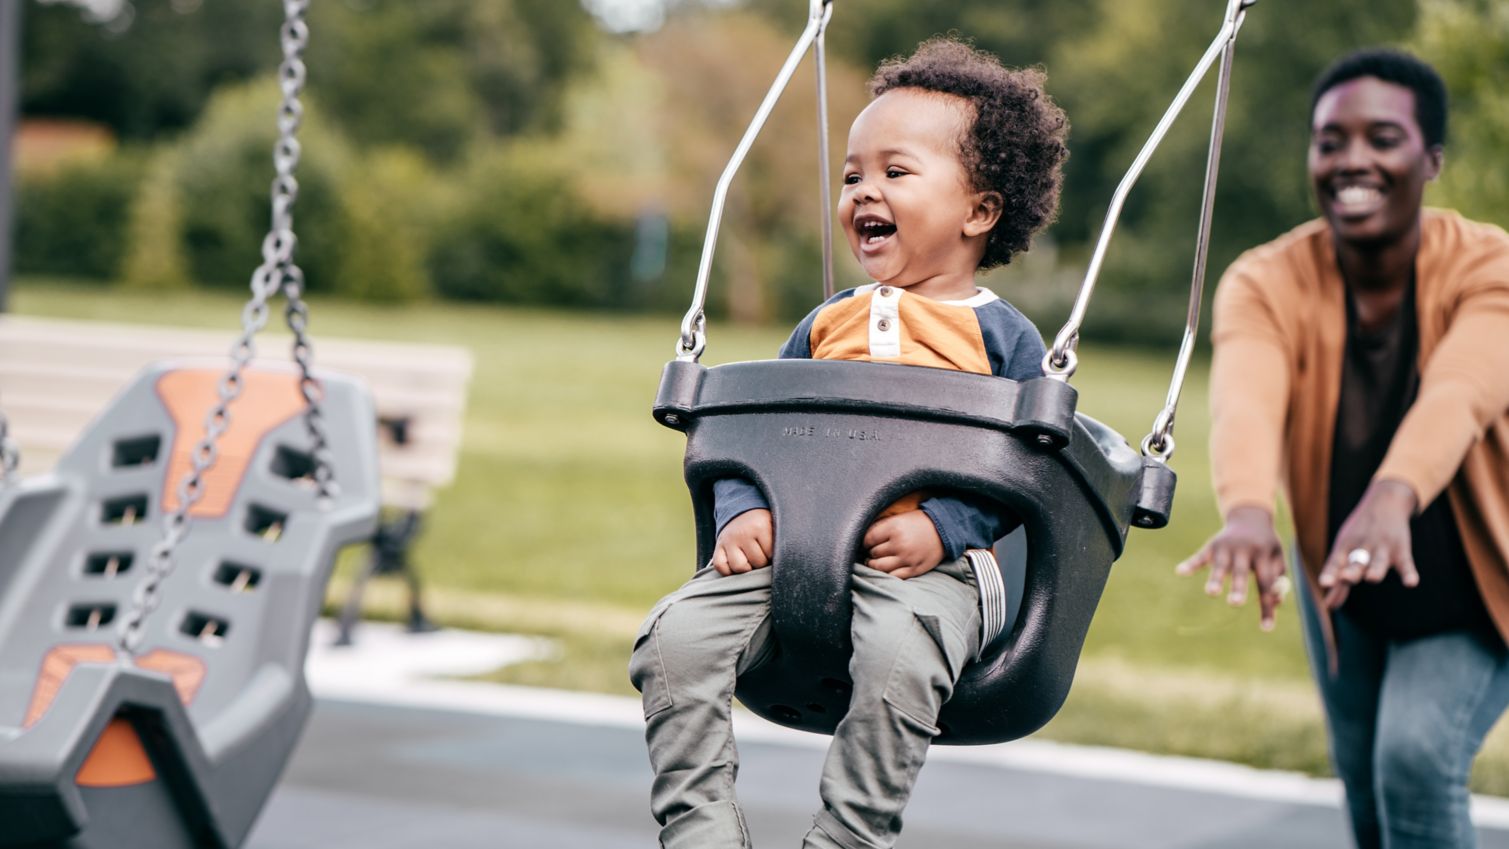 Mom pushes son in swing